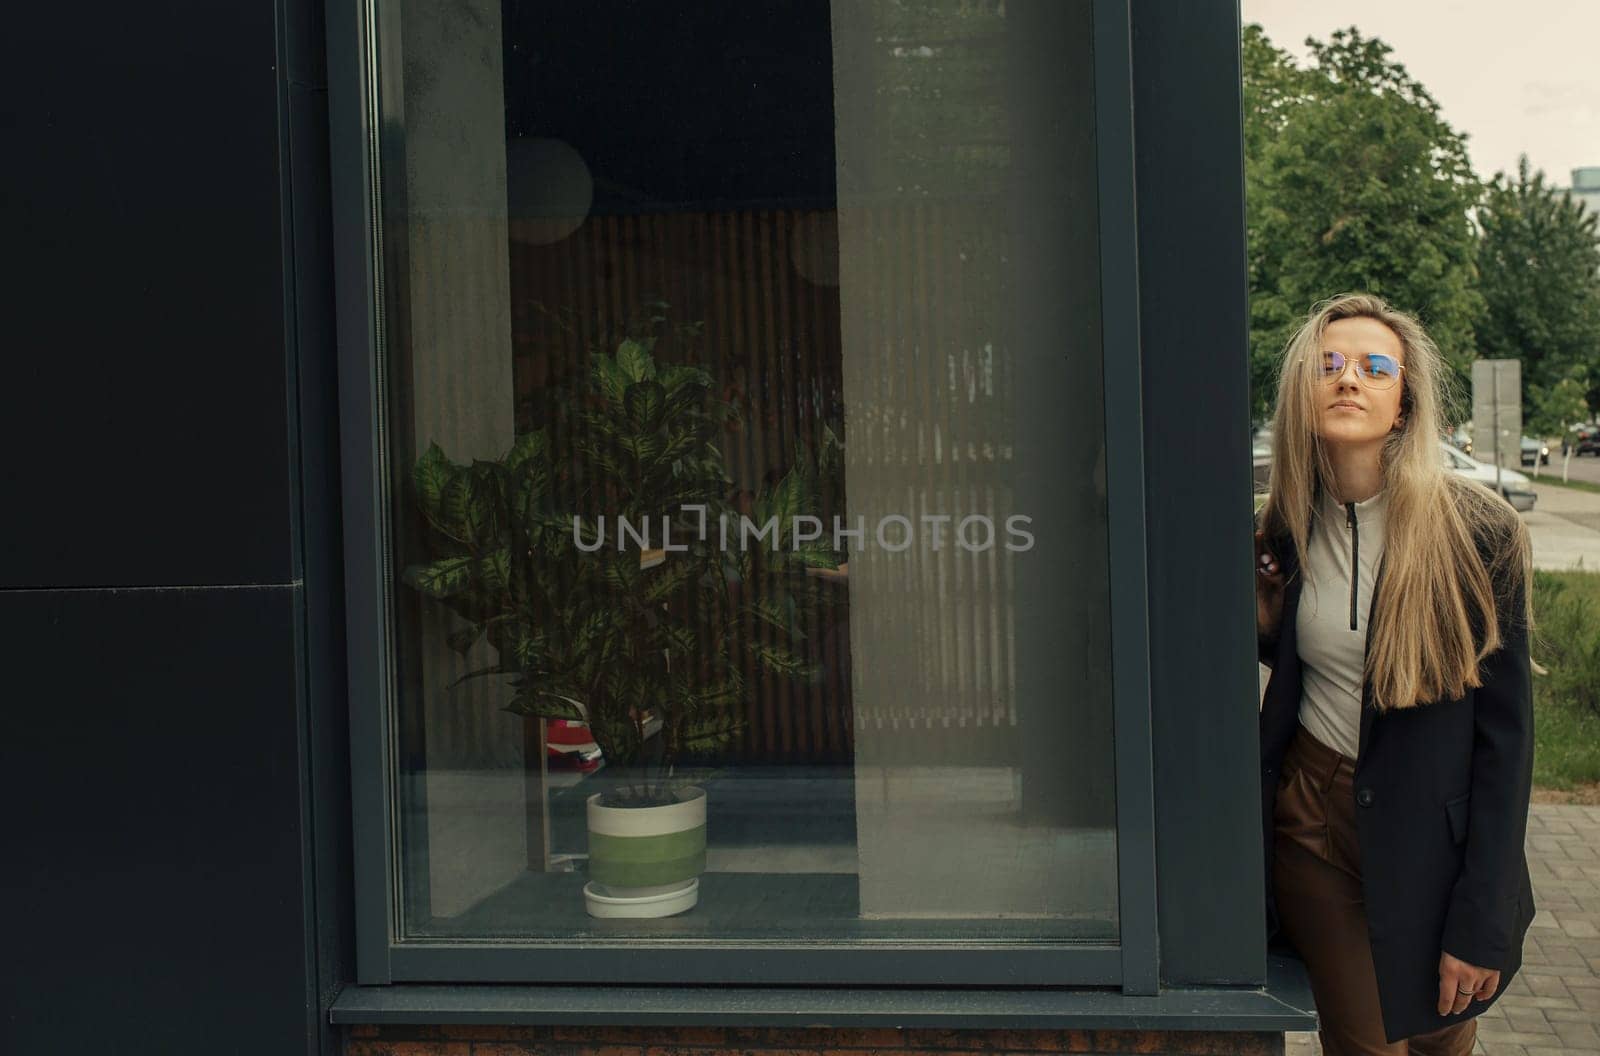 A woman wearing a black jacket is leaning against a glass door outdoors.